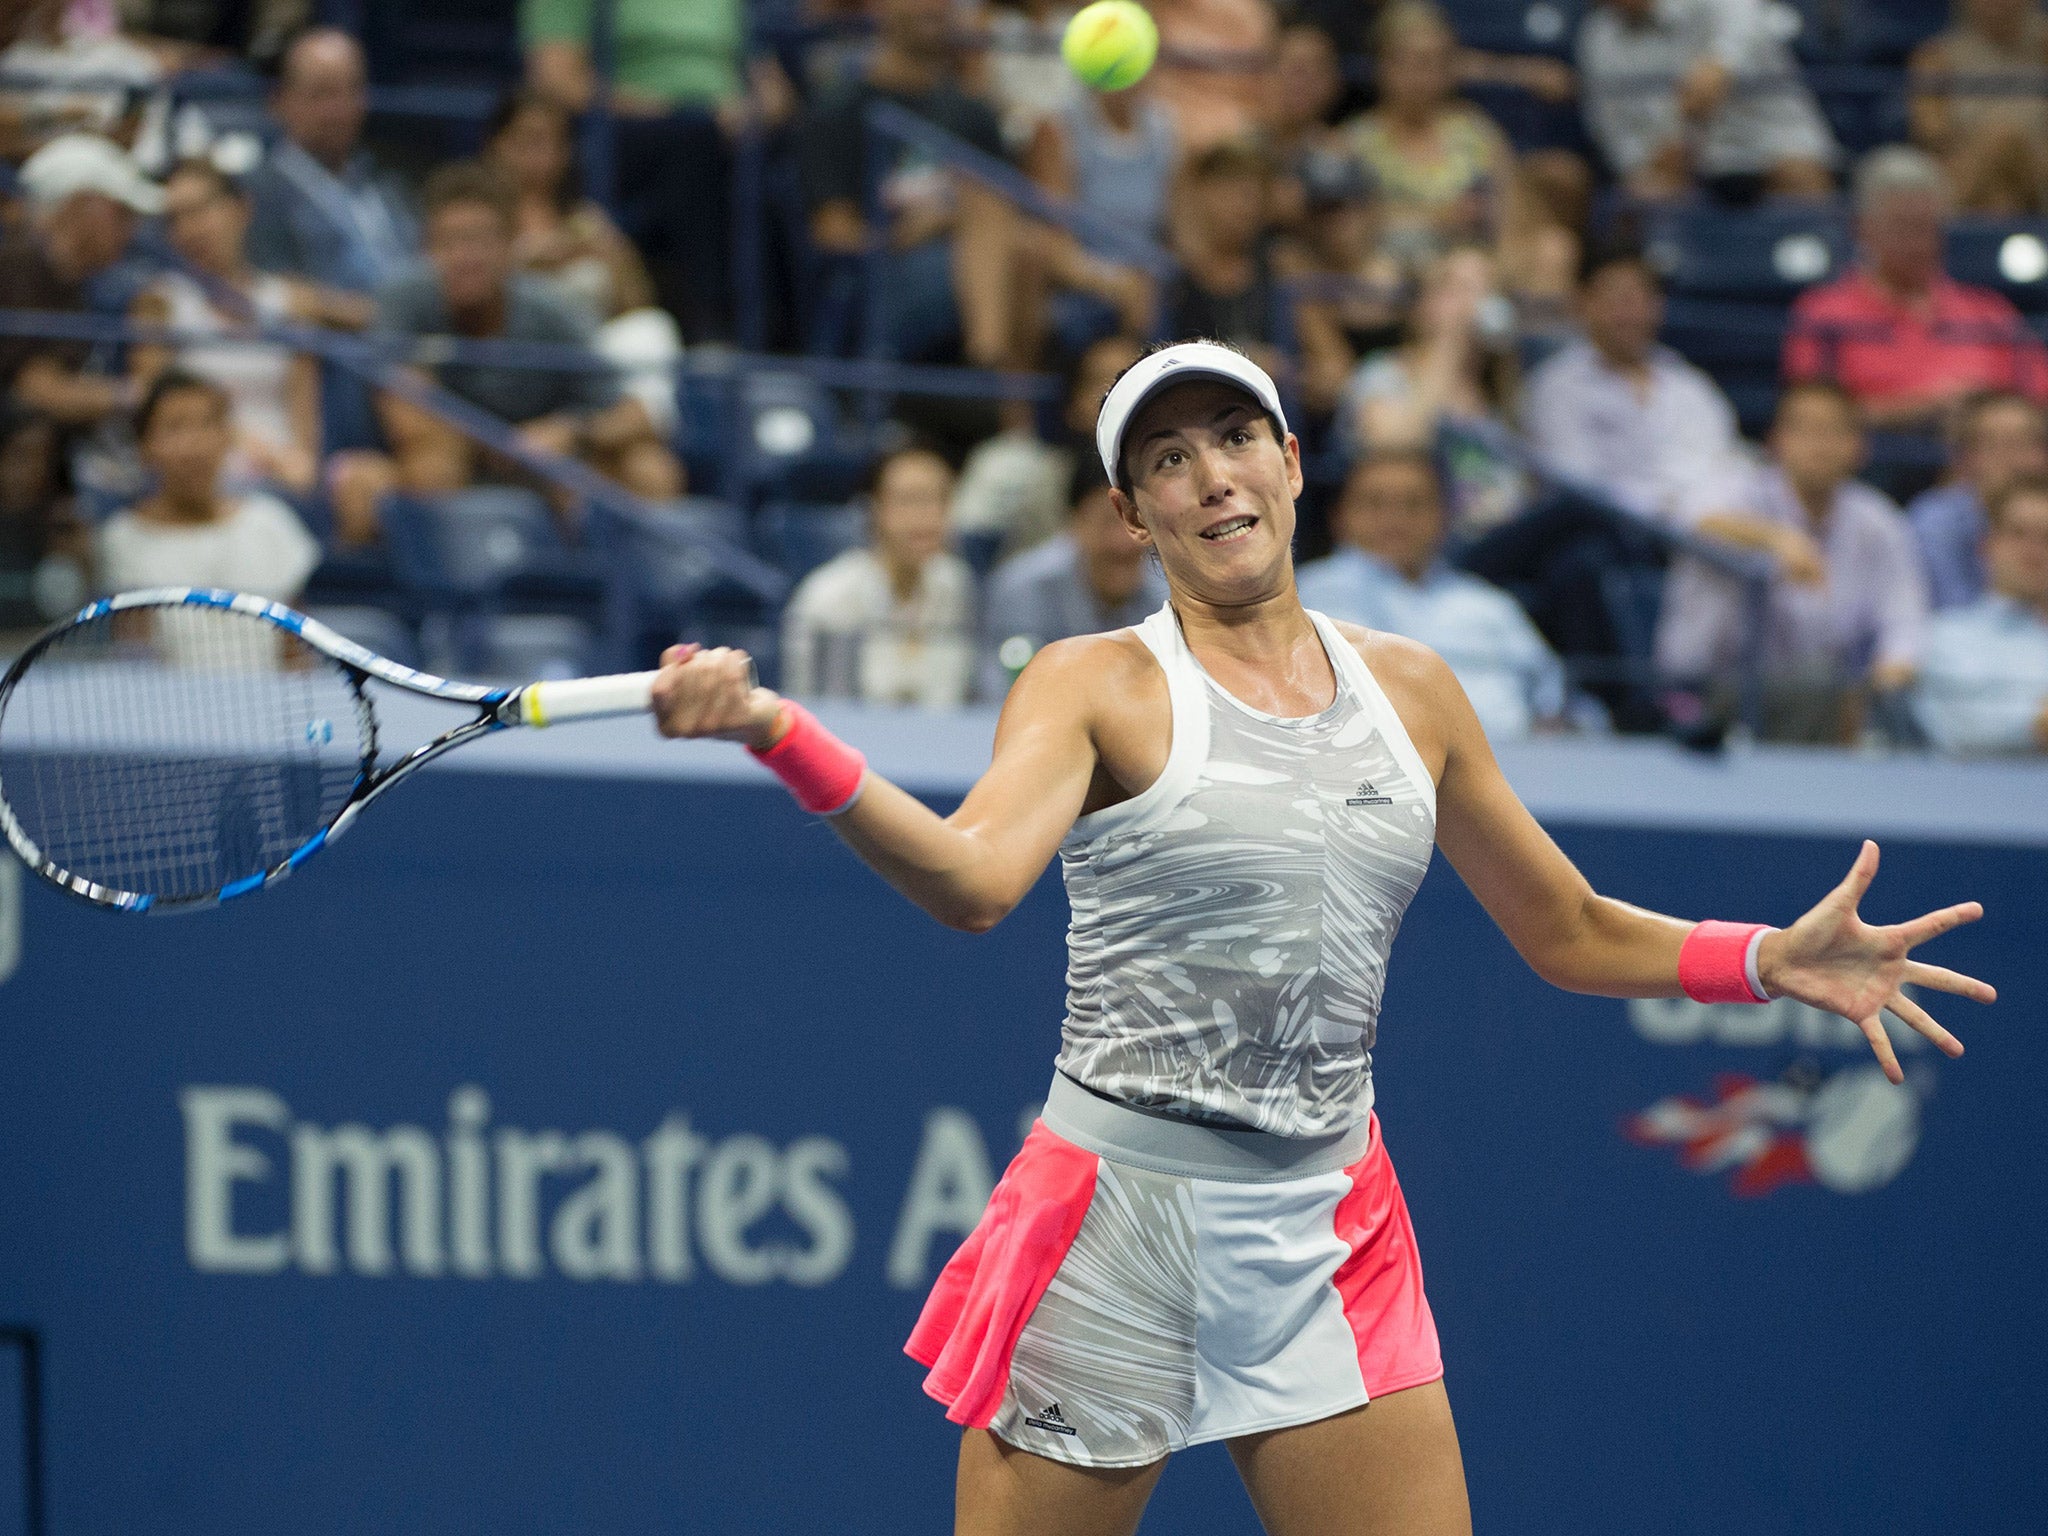 Muguruza struggled at the US Open once again to continue her run of poor results at Flushing Meadows